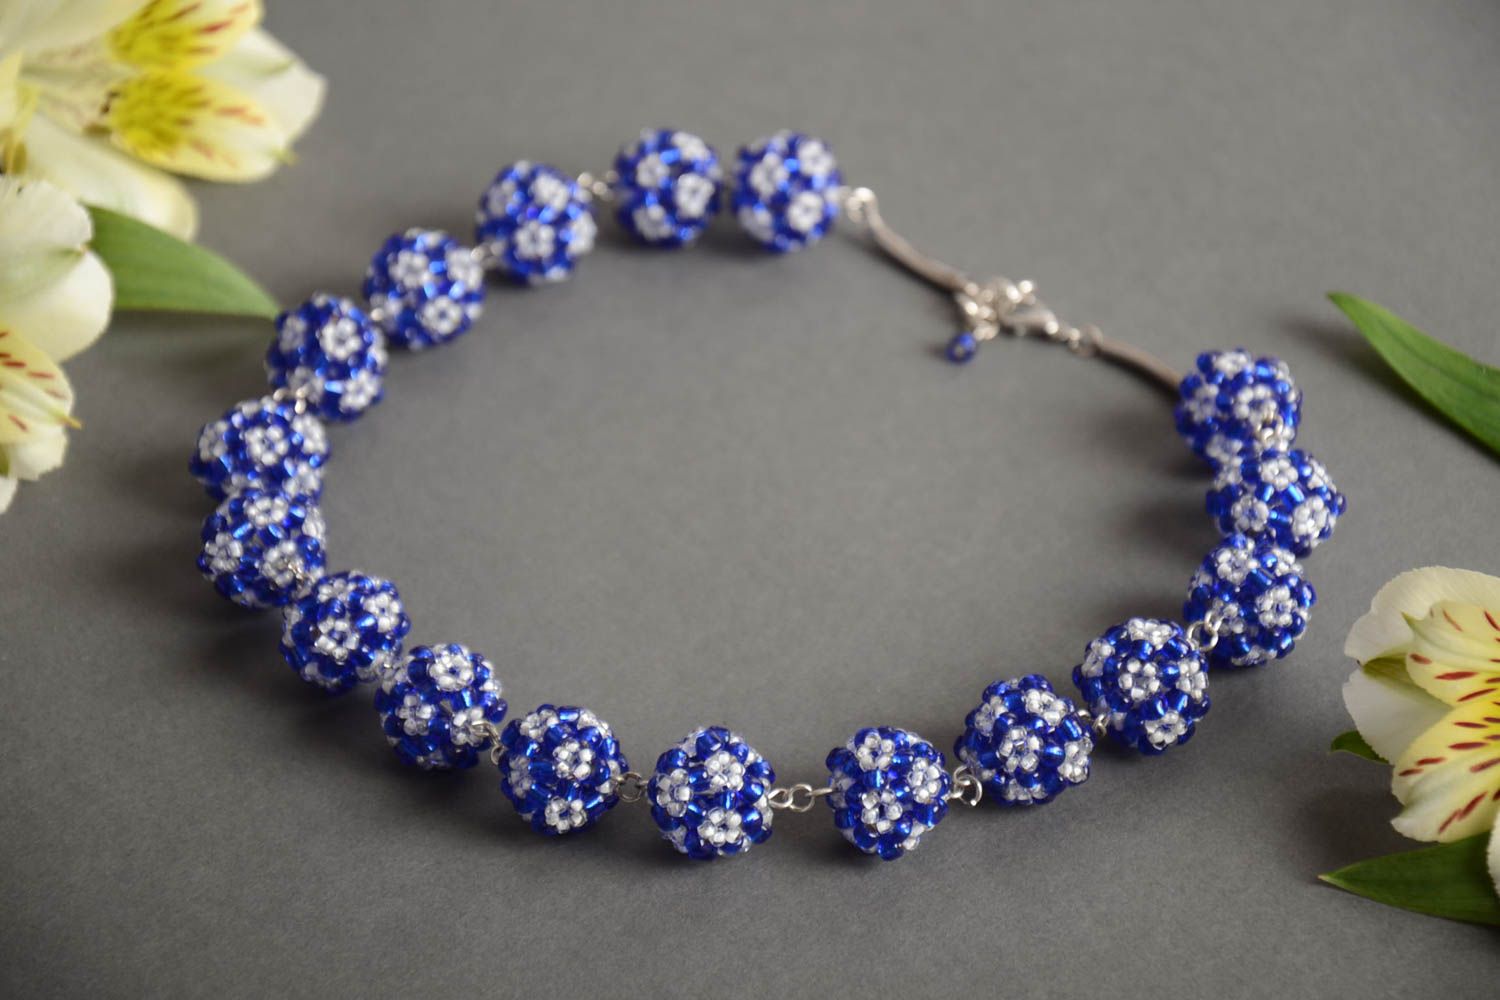 Handmade designer women's necklace with balls crocheted of blue and white beads photo 1